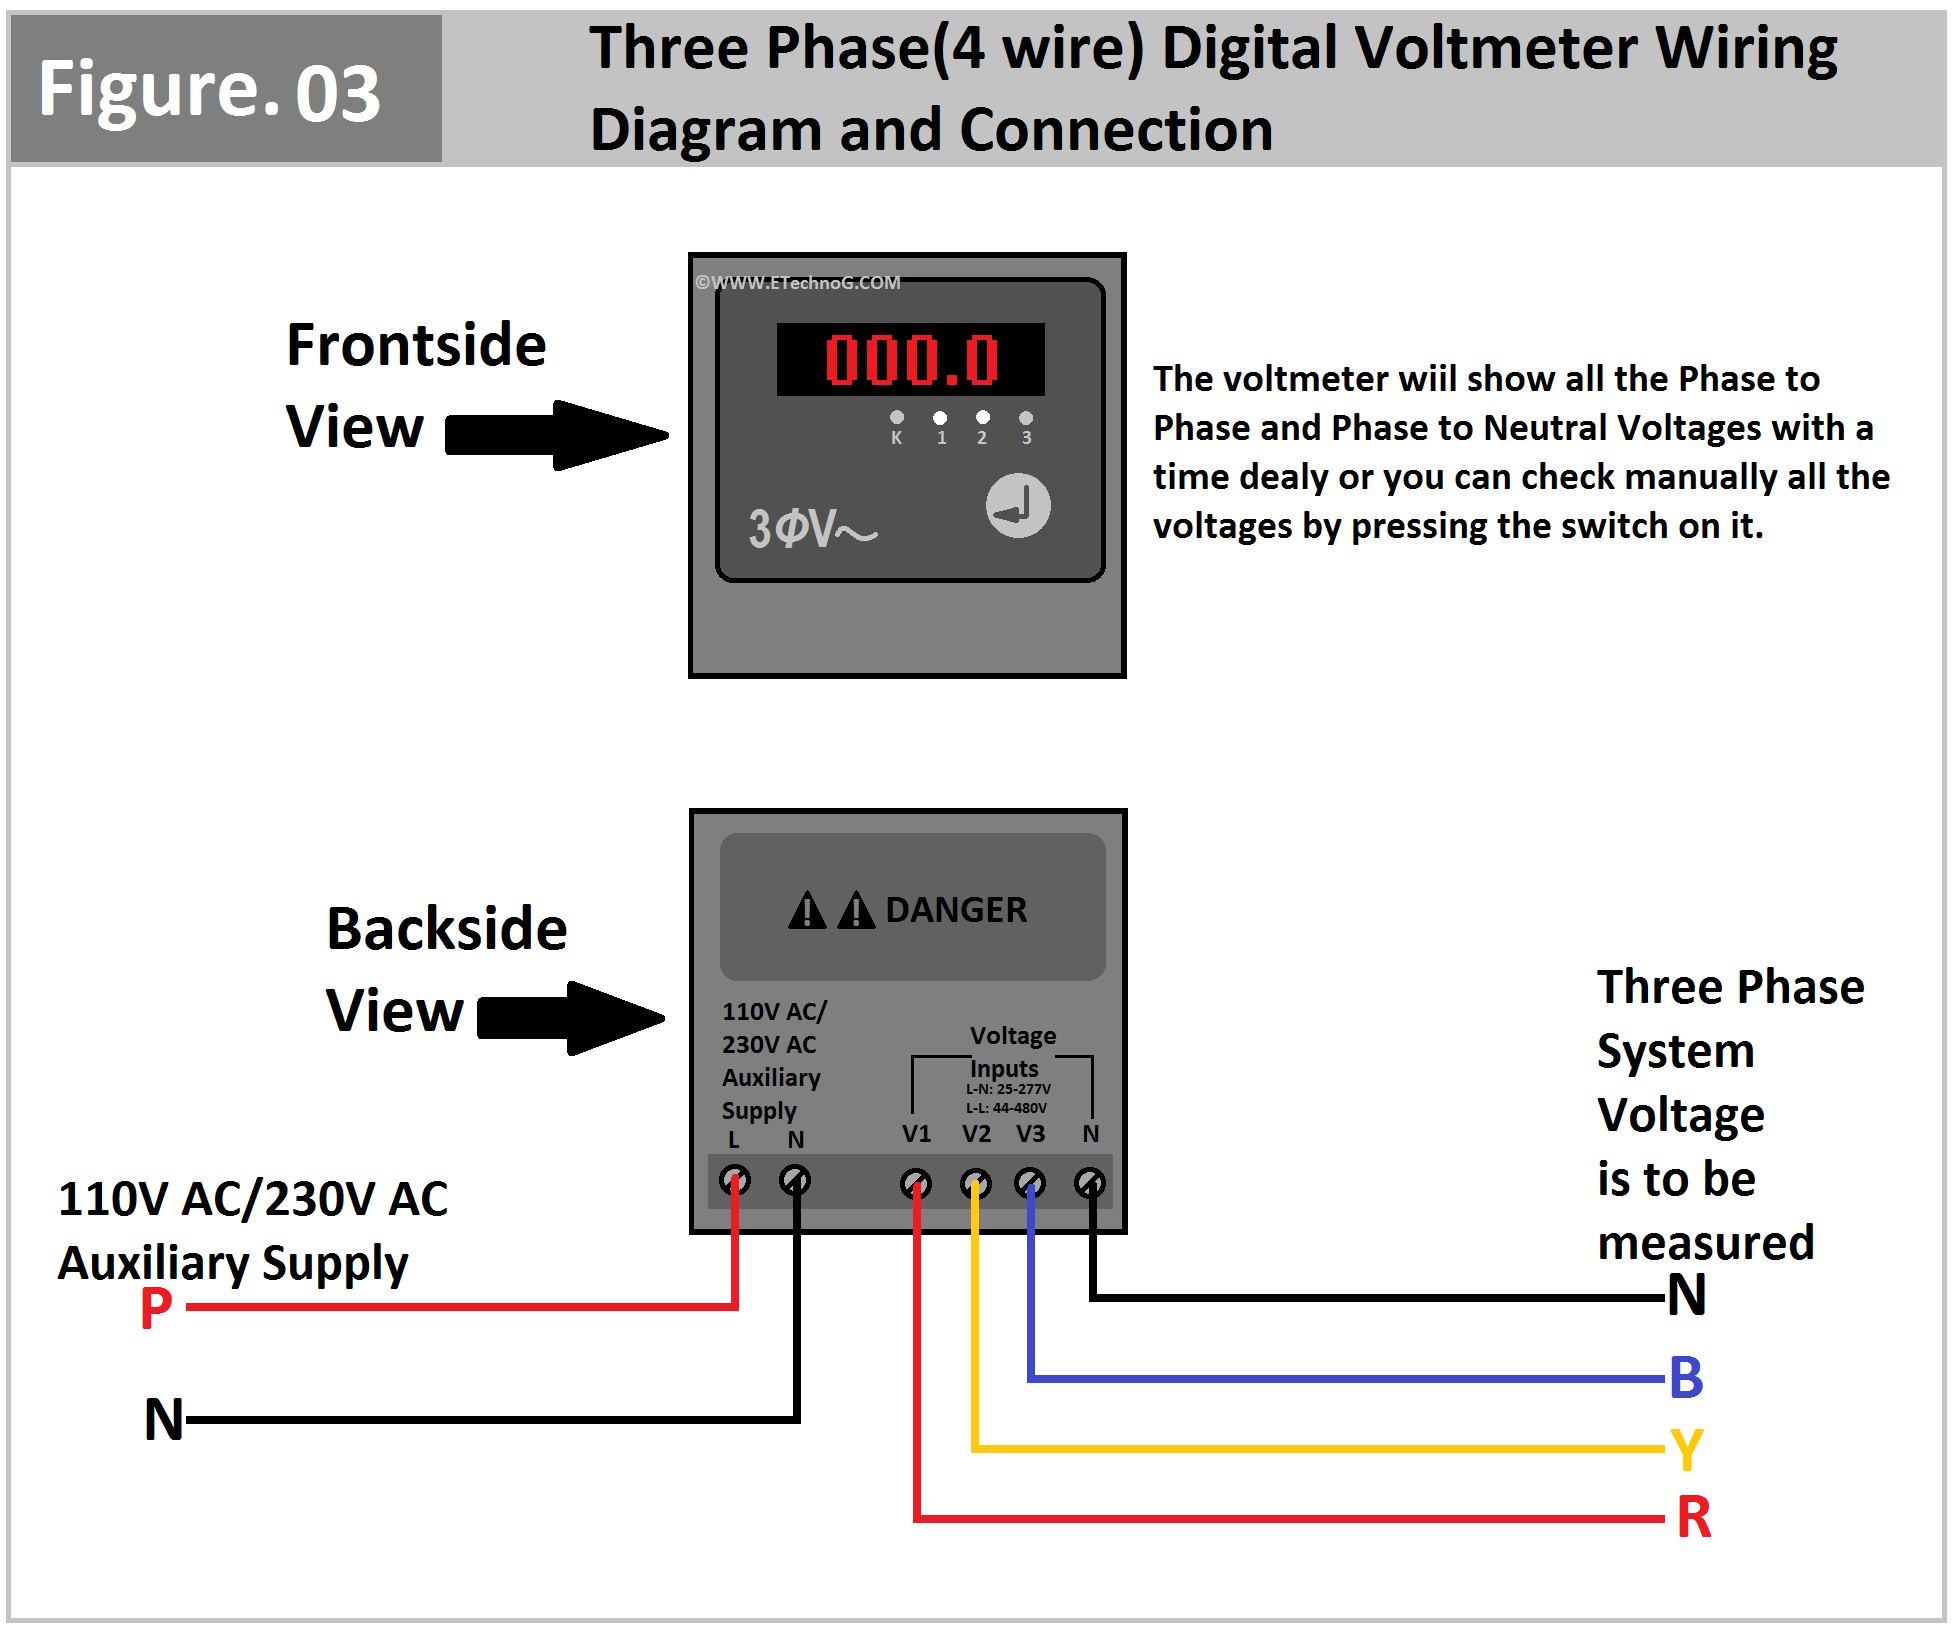 Three(3) Phase Digital Voltmeter Wiring Diagram and Connection